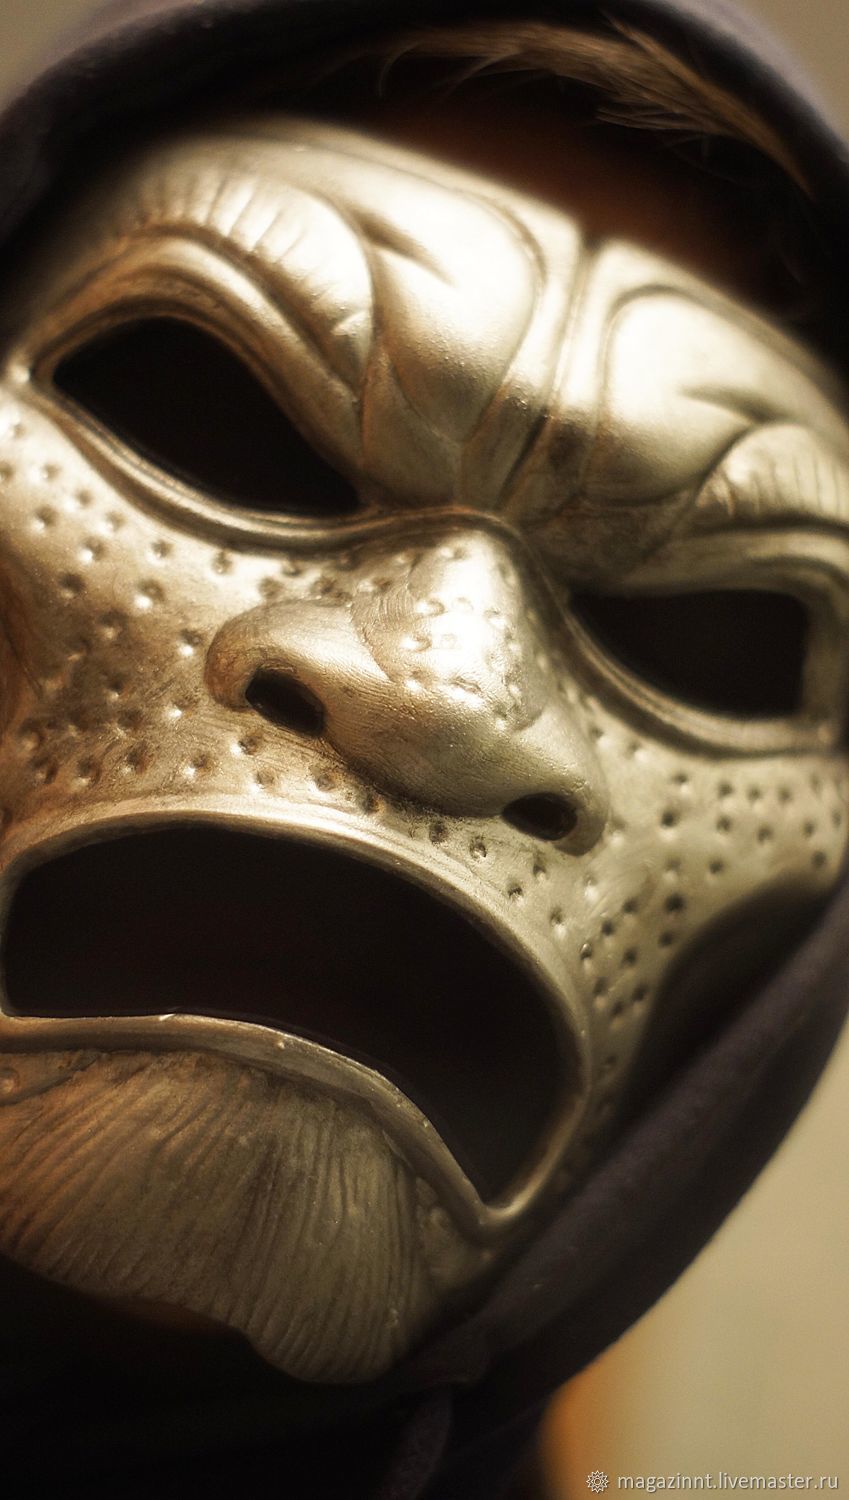 Immortal 300 spartans Horror Movie mask scary movie mask 300 Spartans costume 